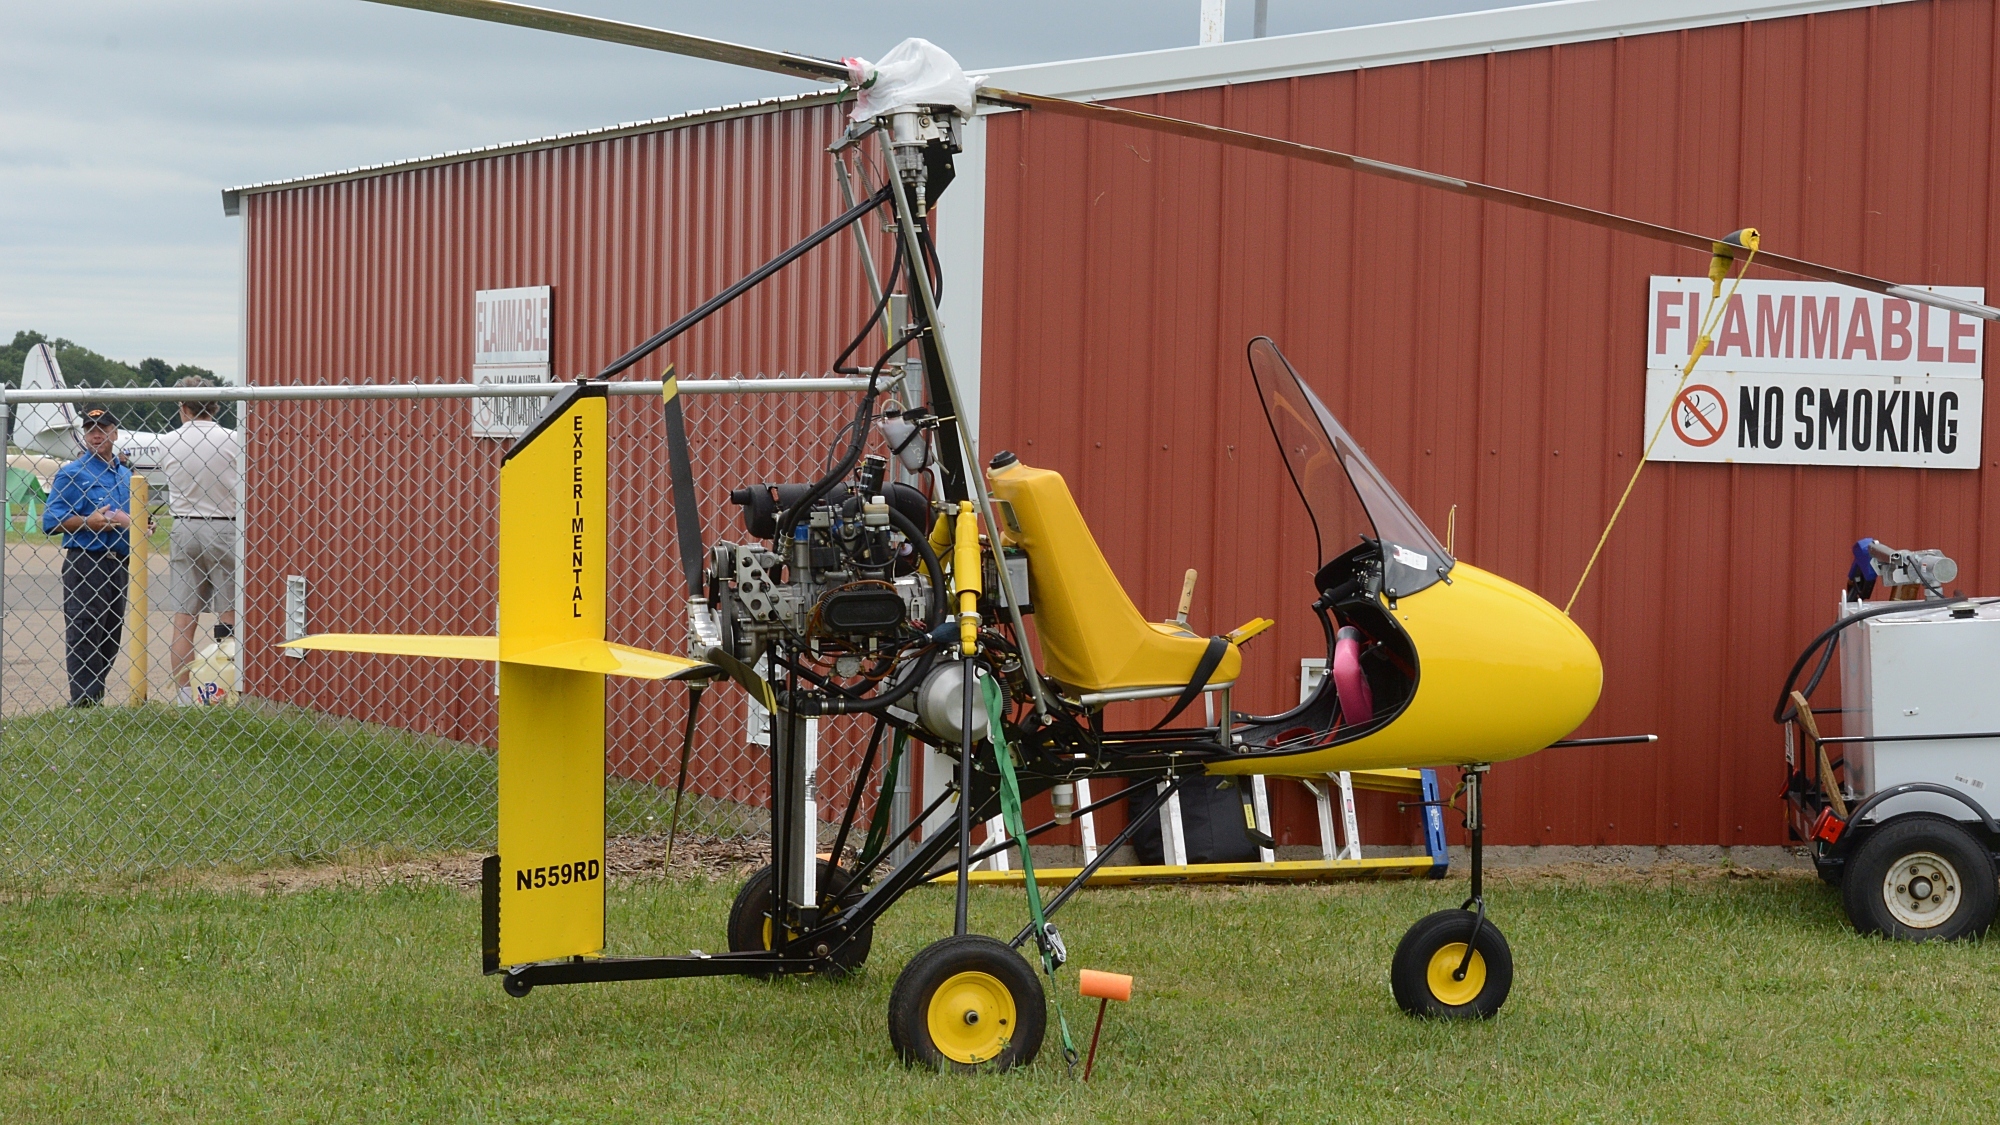 The Rotor Flight Dynamics Dominator is an American autogyro designed by Ern...